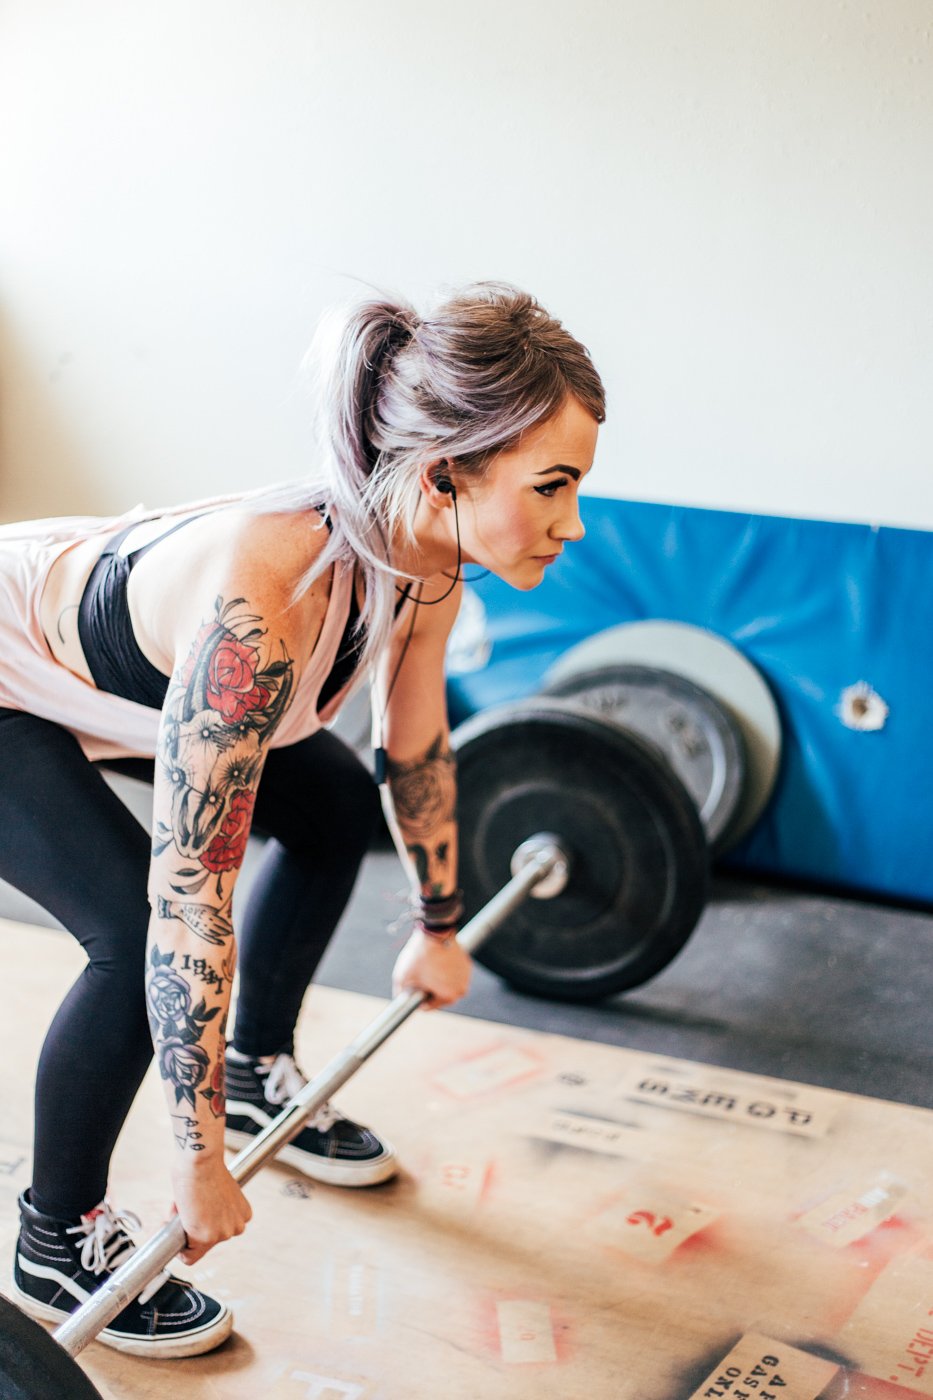 Tattooed woman weightlifting while wearing earbuds.